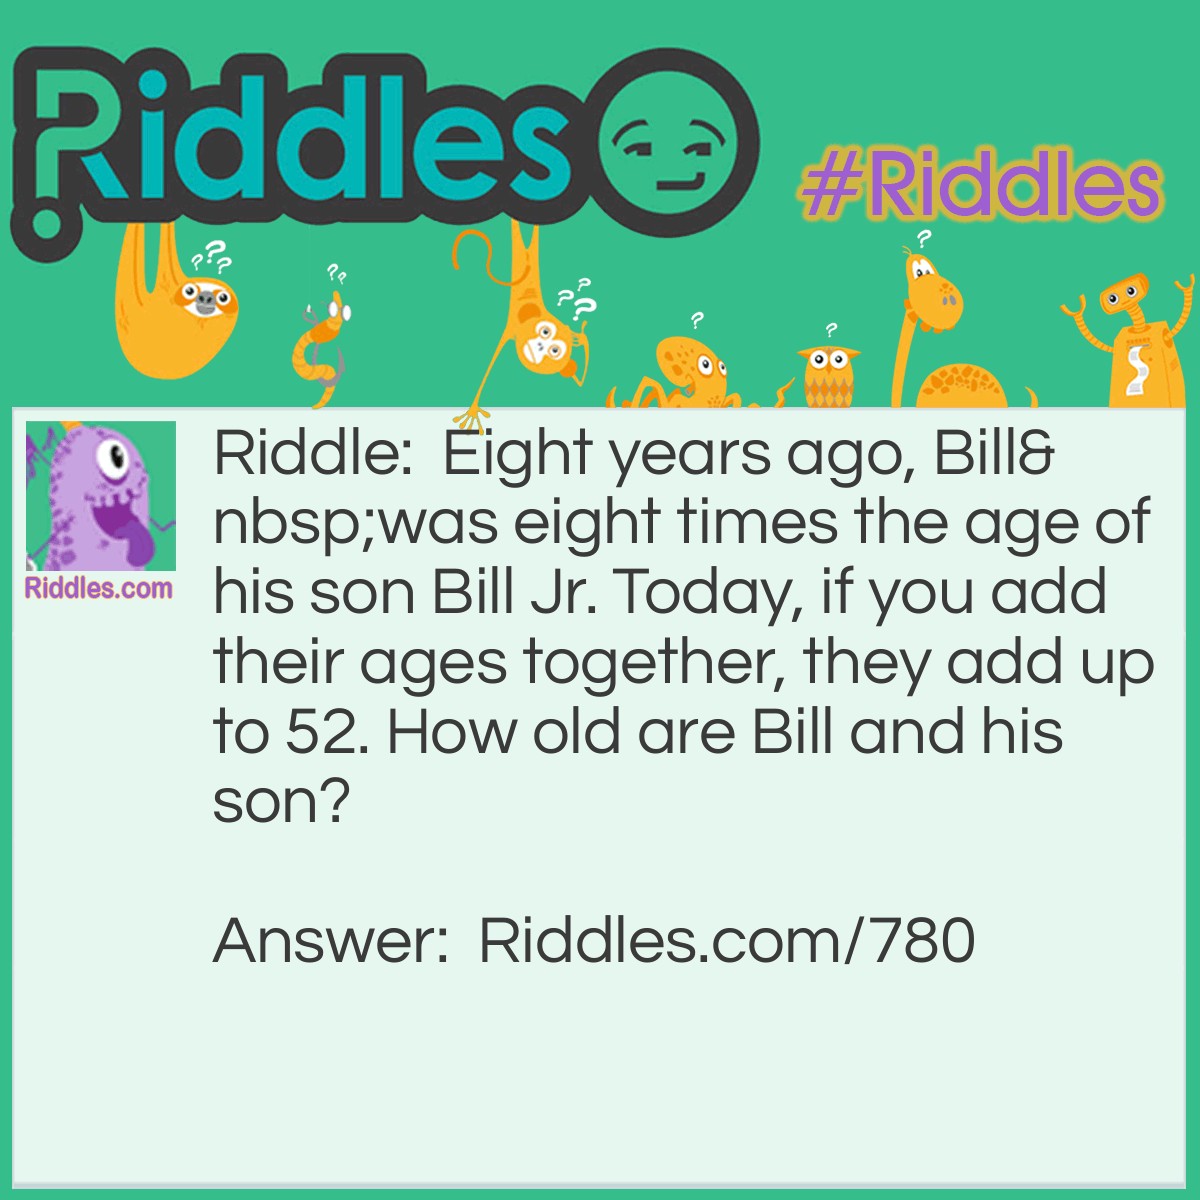 Riddle: Eight years ago, Bill was eight times the age of his son Bill Jr. Today, if you add their ages together, they add up to 52. How old are Bill and his son? Answer: Bill is 40, and Bill Jr. is 12.